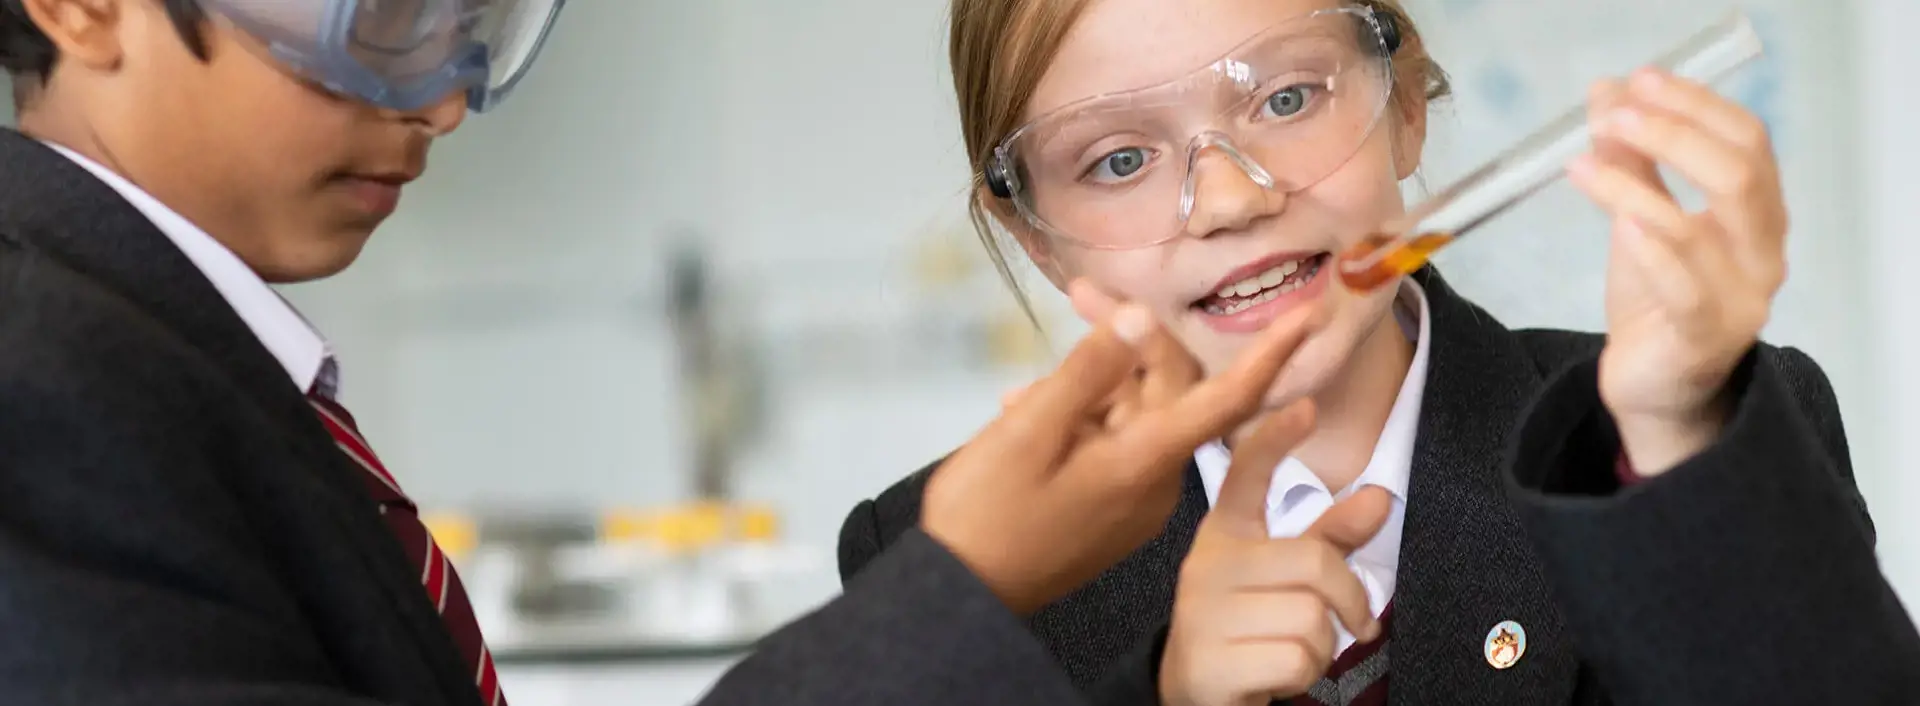 Pupils in science class, holding a test tube